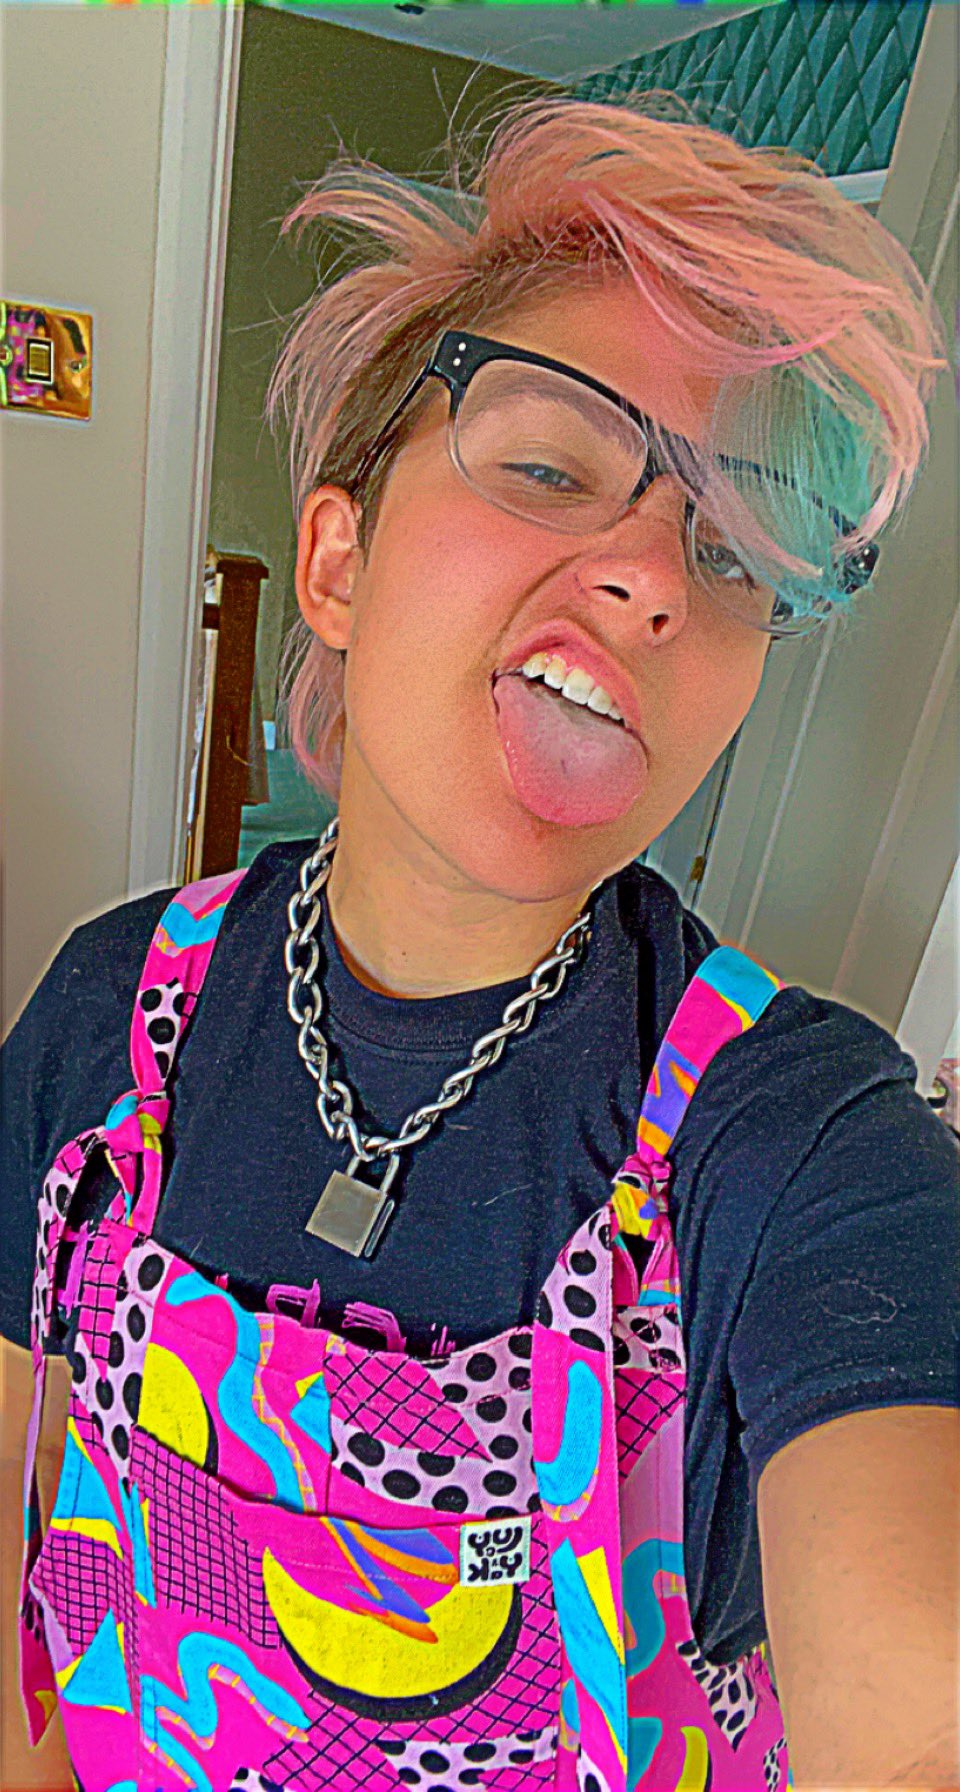 Non-binary Yungblud fan Wolfie pictured wearing pink dungarees with their tongue out. They are wearing glasses and have pink hair and a padlock around their neck.